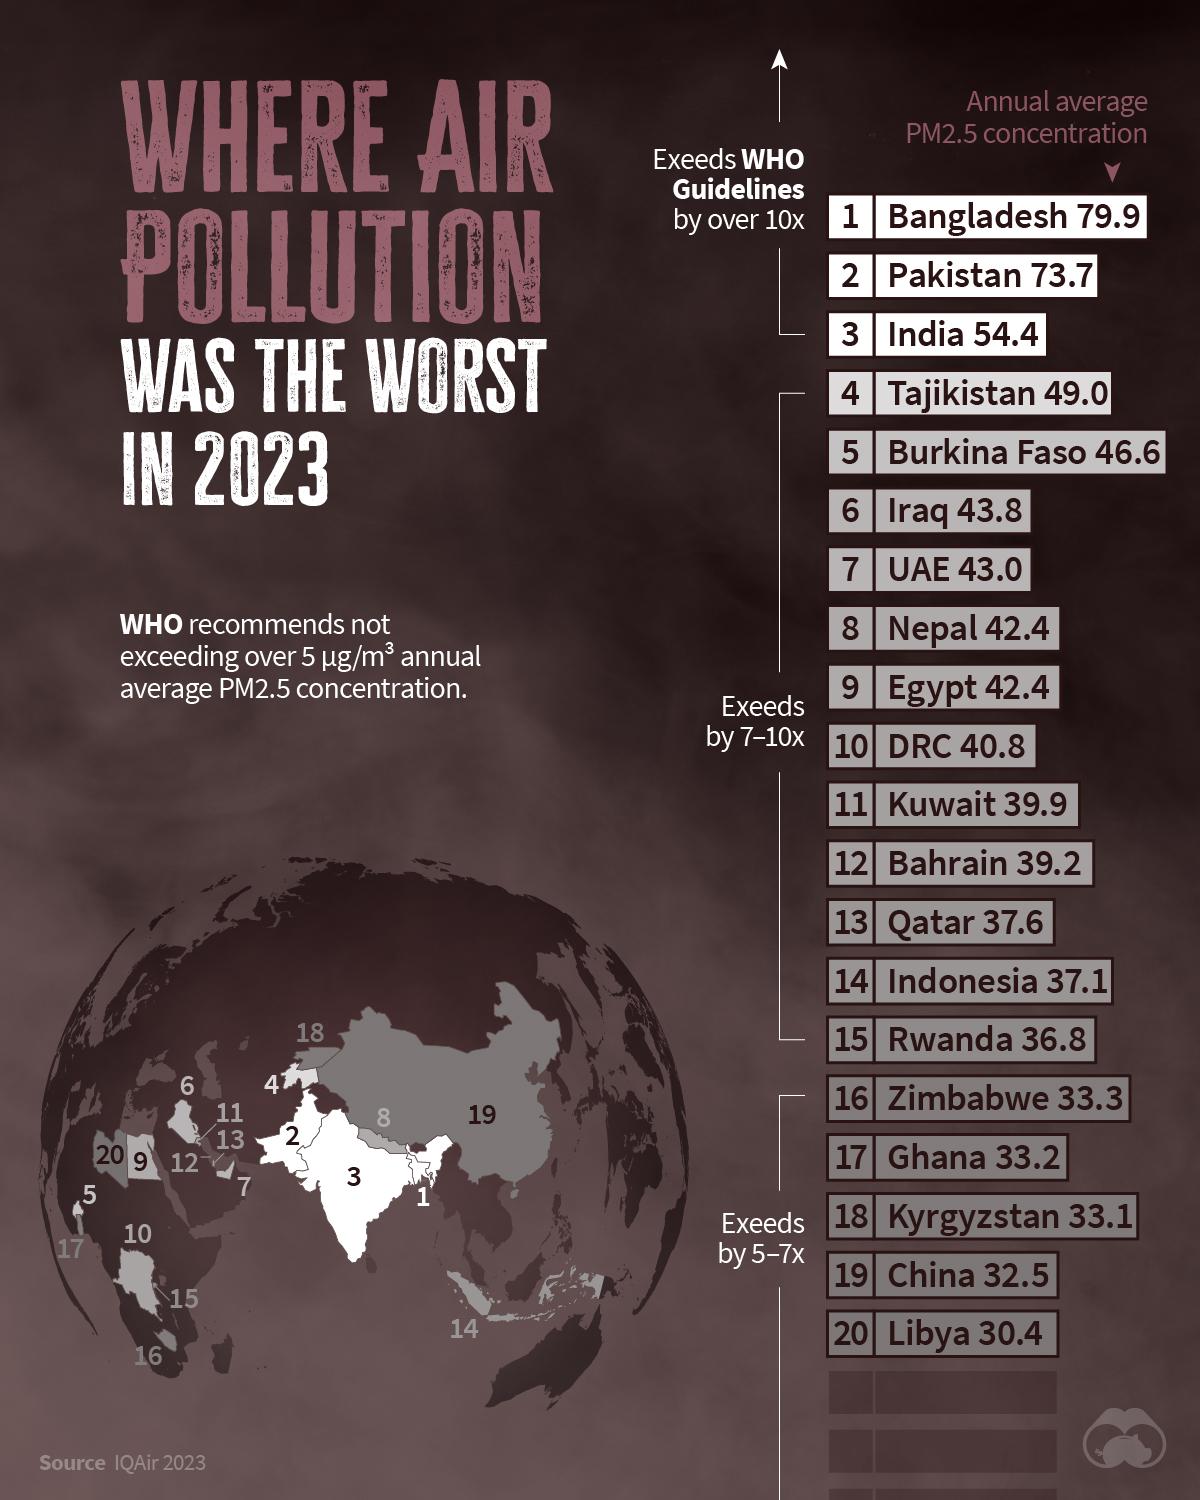 South Asian Countries Lead the World in PM2.5 Pollution ☁️